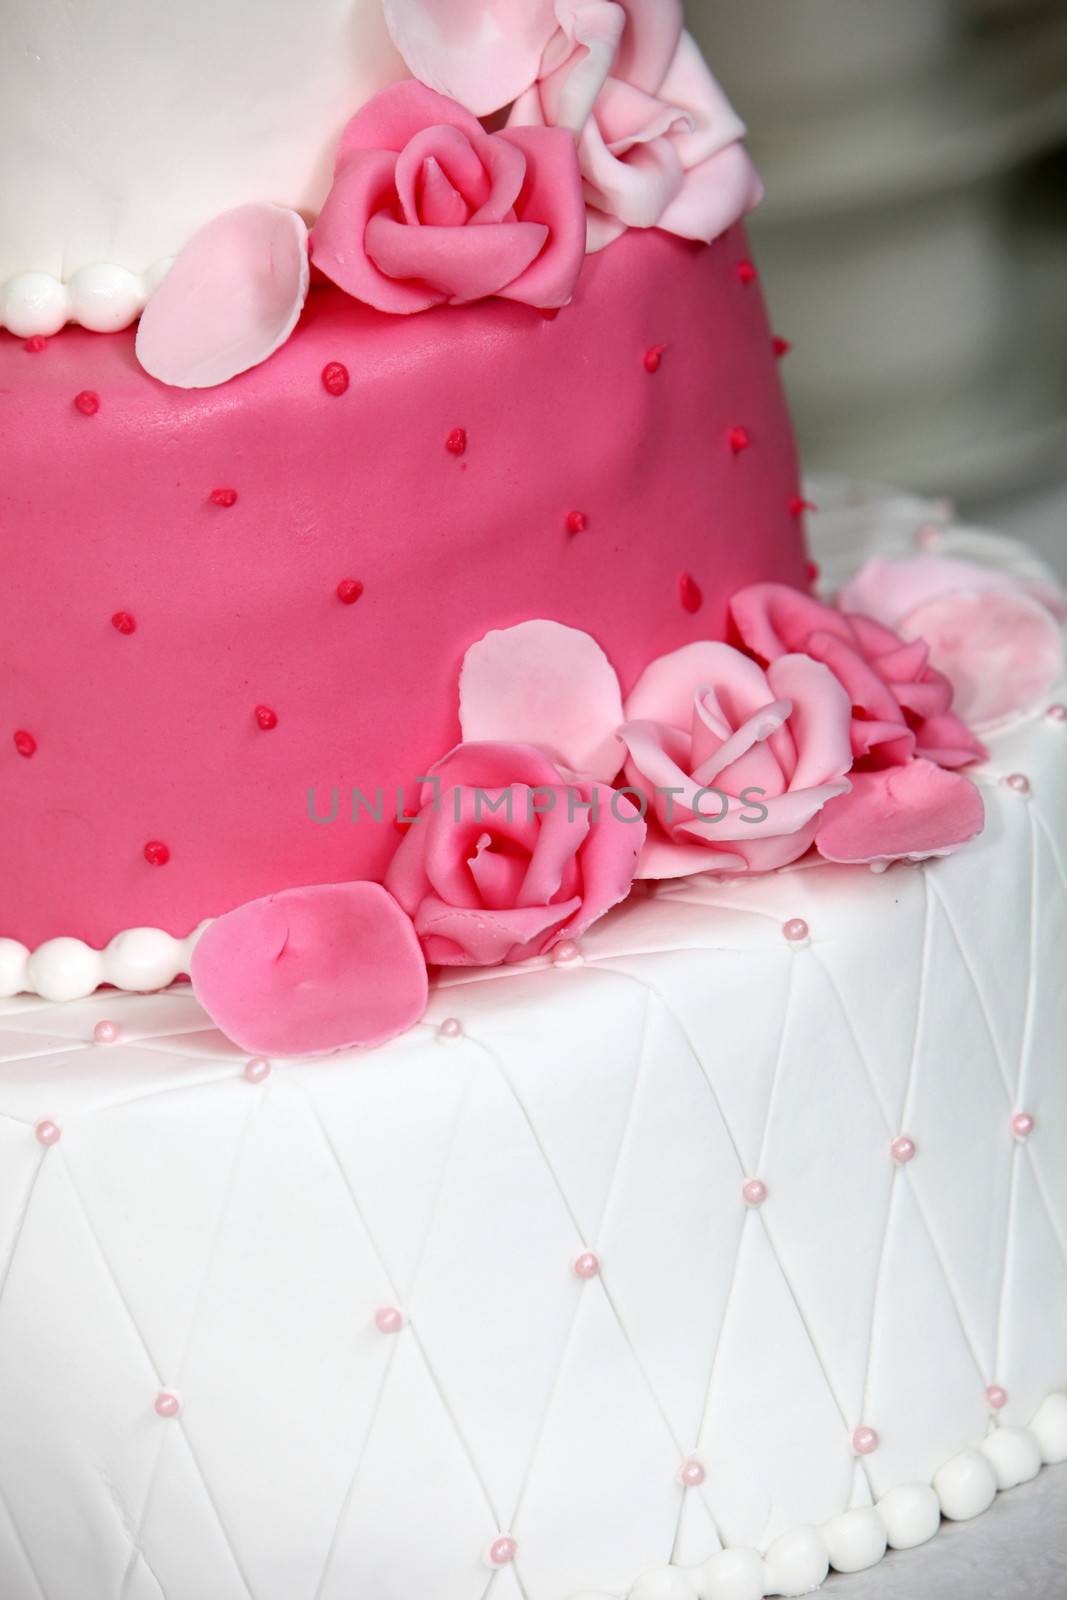 Tiered wedding cake decorated with pink roses made of icing sugar to match the pink and white alternating tiers